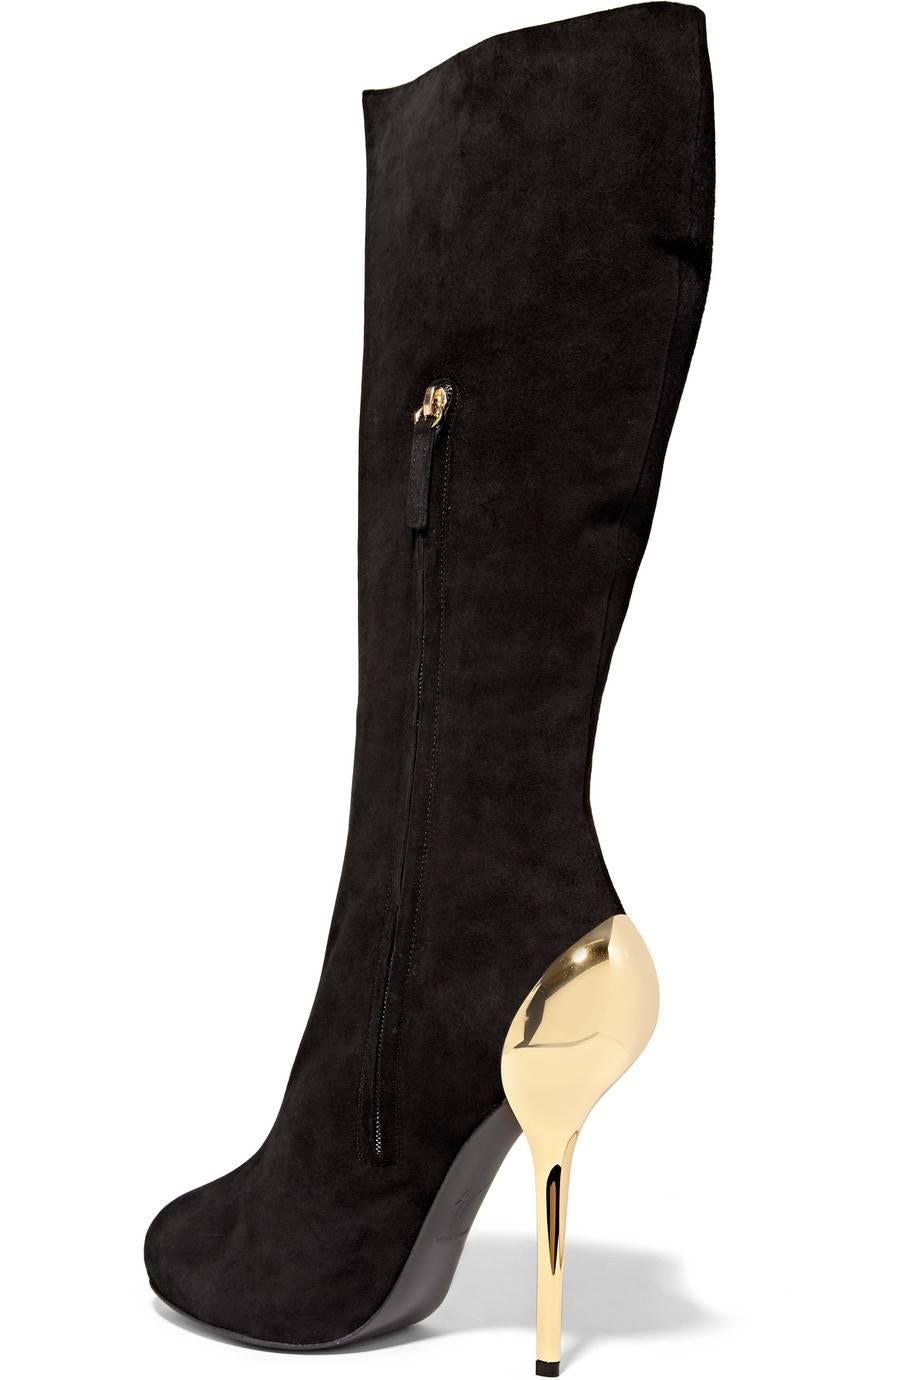 Women's Giuseppe Zanotti NEW & SOLD OUT Black Suede Gold Metal Knee High Boots in Box